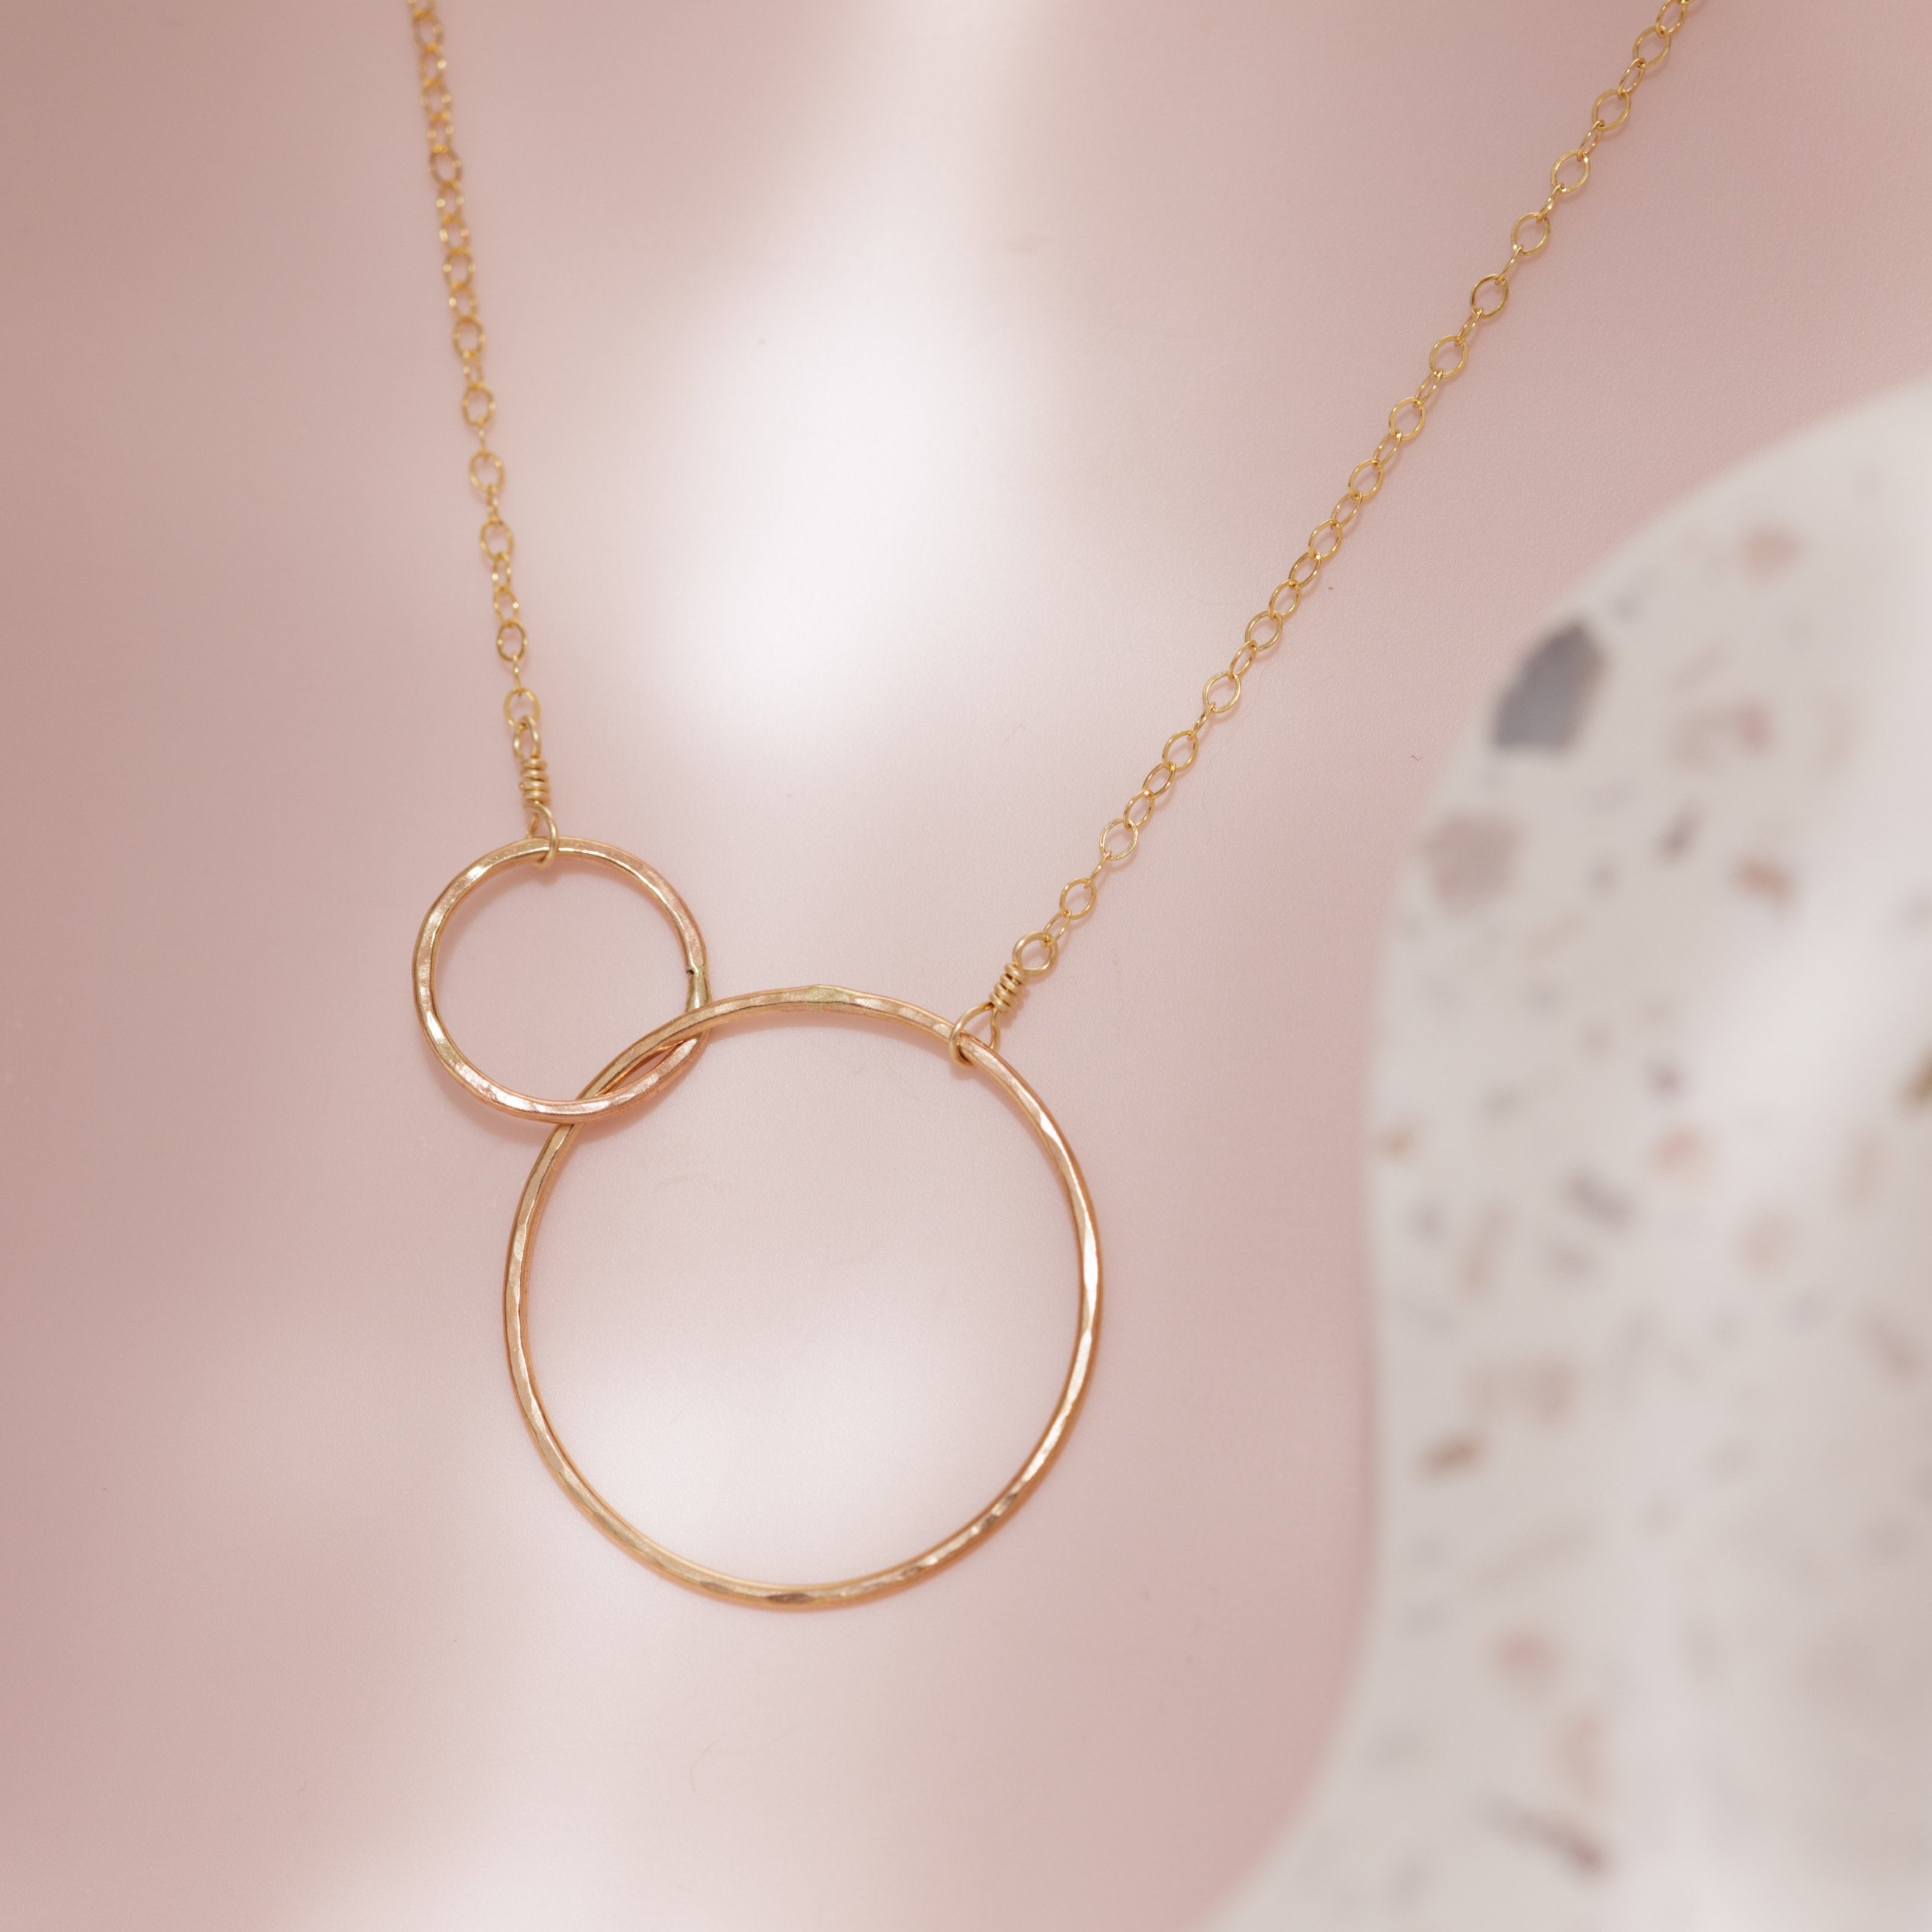 Linked-ring necklace - Gold-coloured - Ladies | H&M